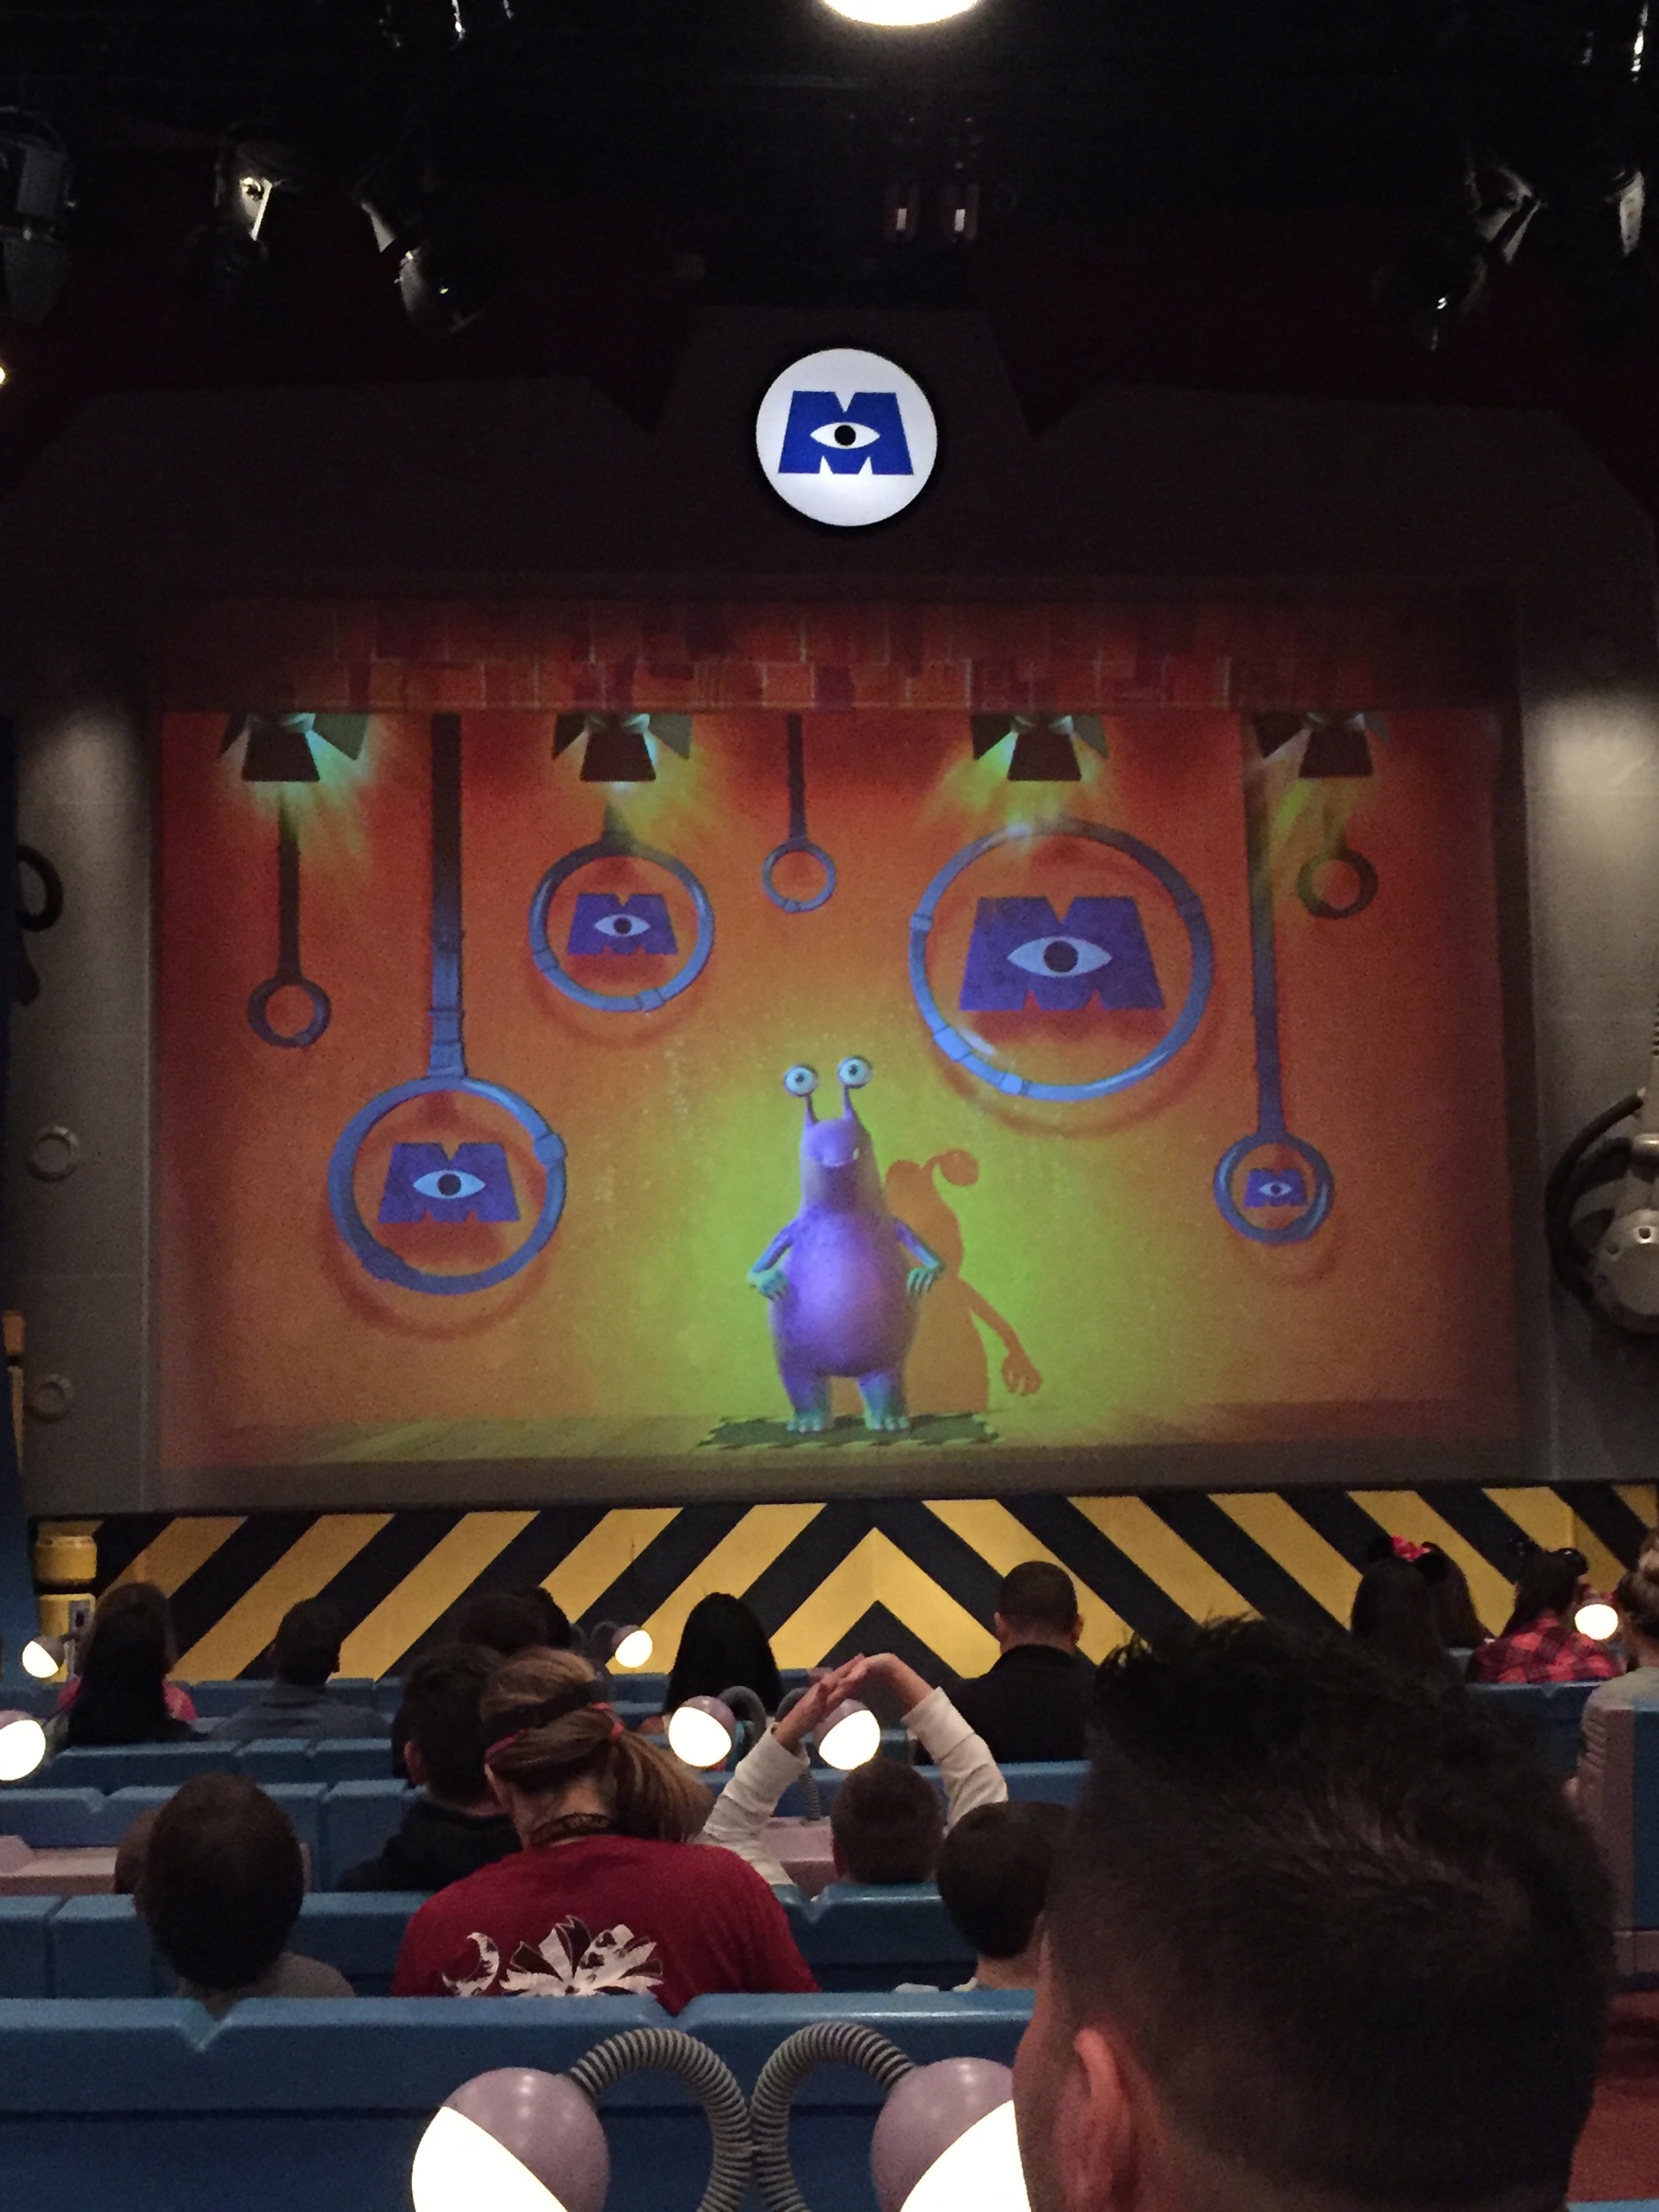 Monsters Inc. Laugh Floor reopens a few days ahead of its planned return